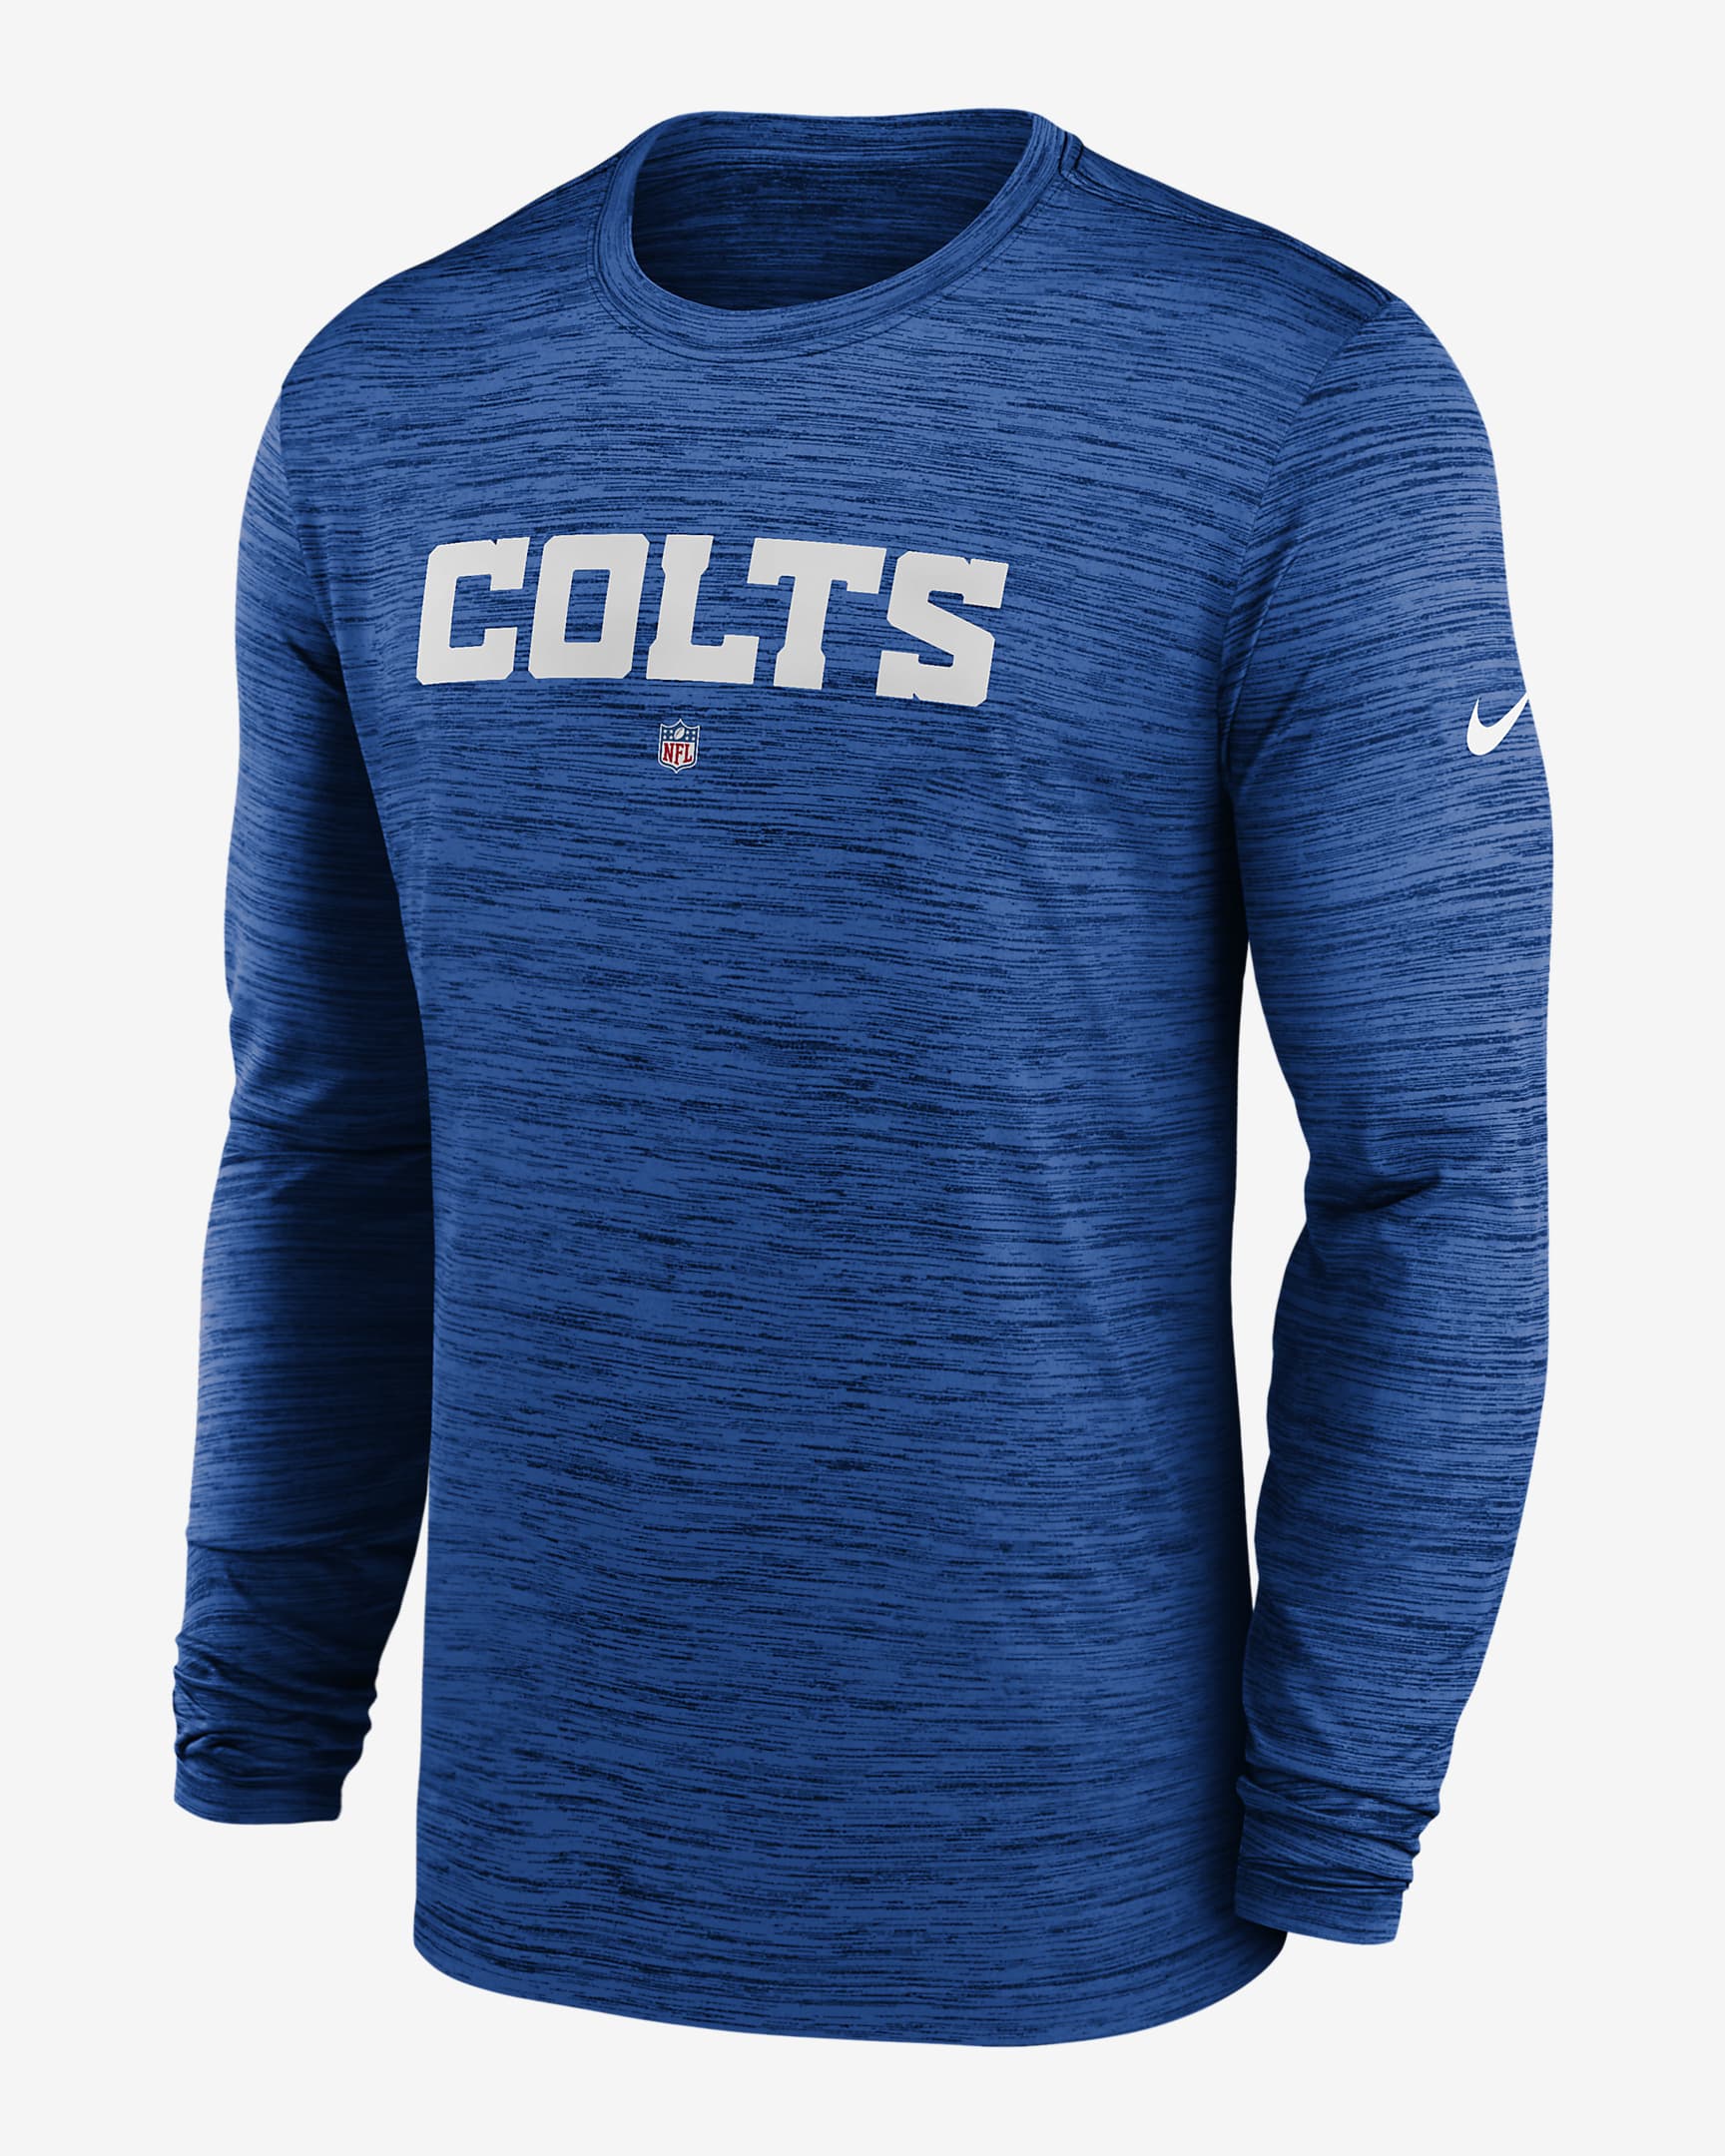 Nike Dri-FIT Sideline Velocity (NFL Indianapolis Colts) Men's Long ...